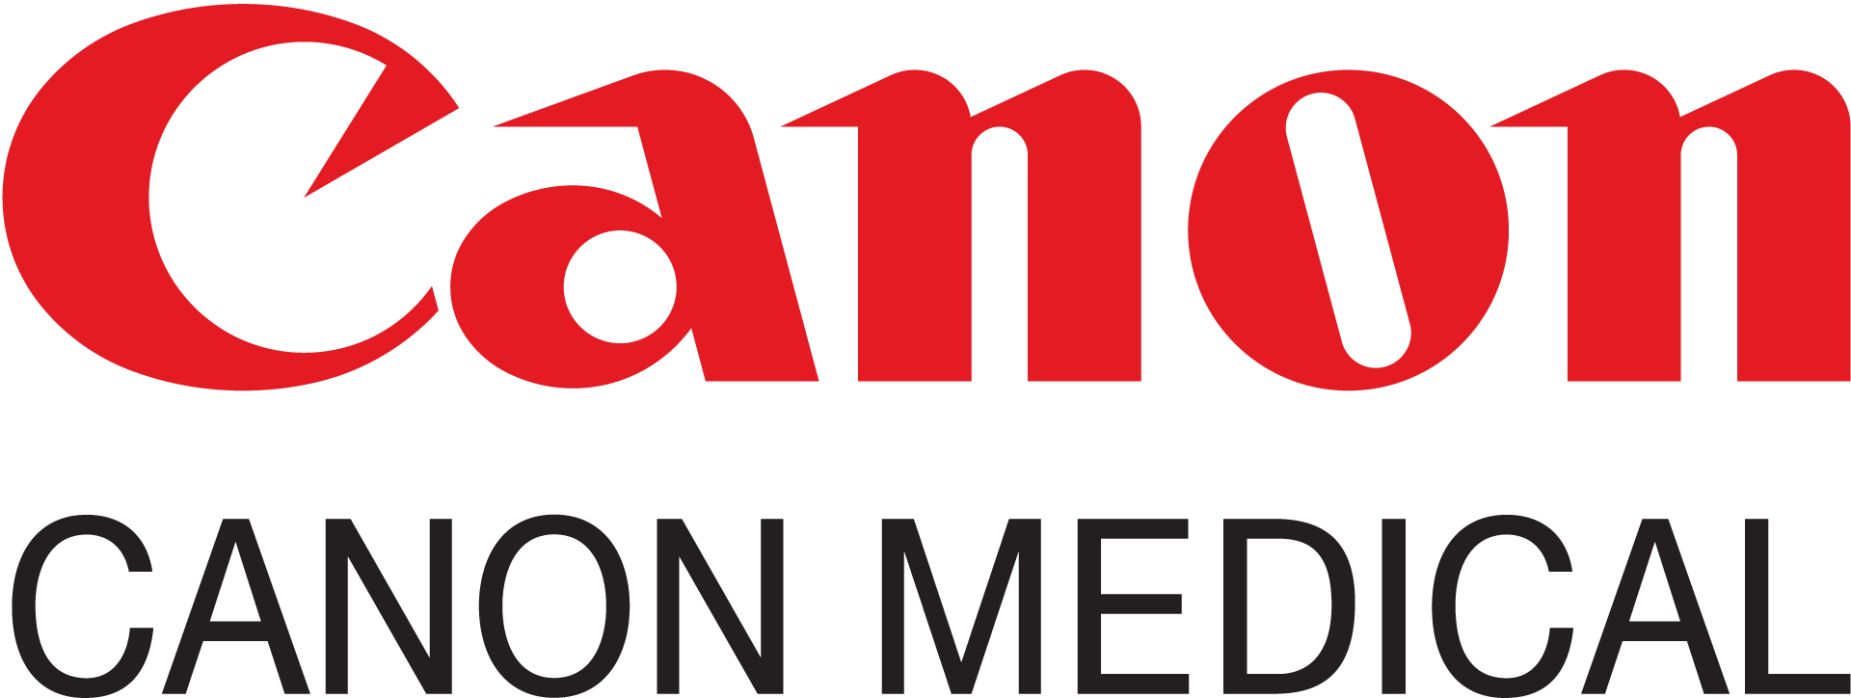 Cannon Medical